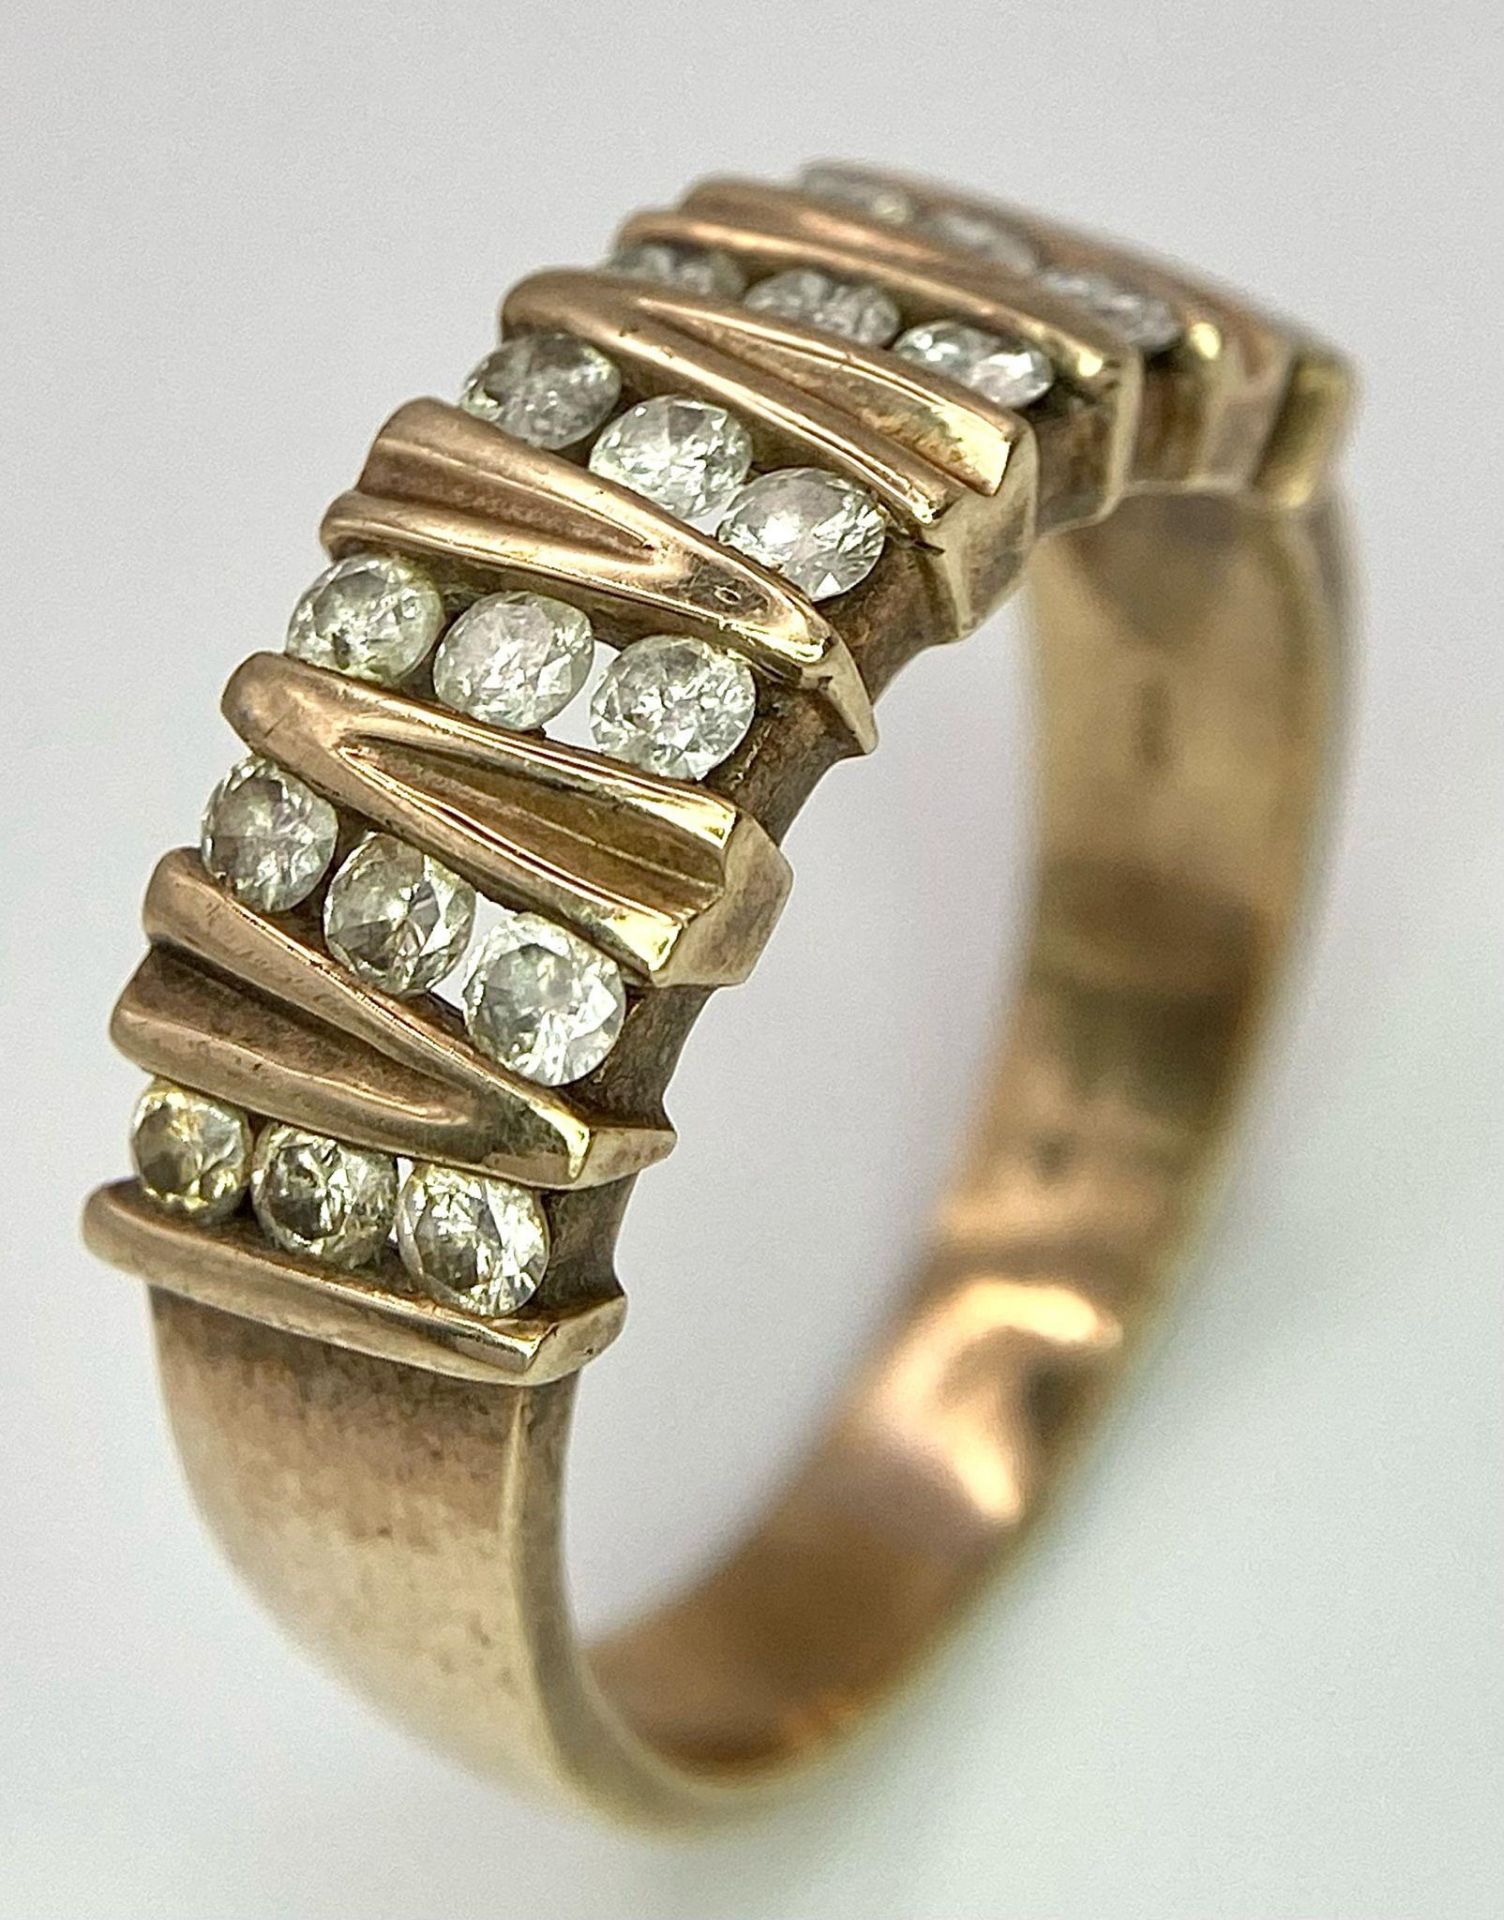 A Vintage 9K Yellow Gold 21 Diamond Ring. 1ctw of brilliant round cut diamonds. Size T. 5.9g total